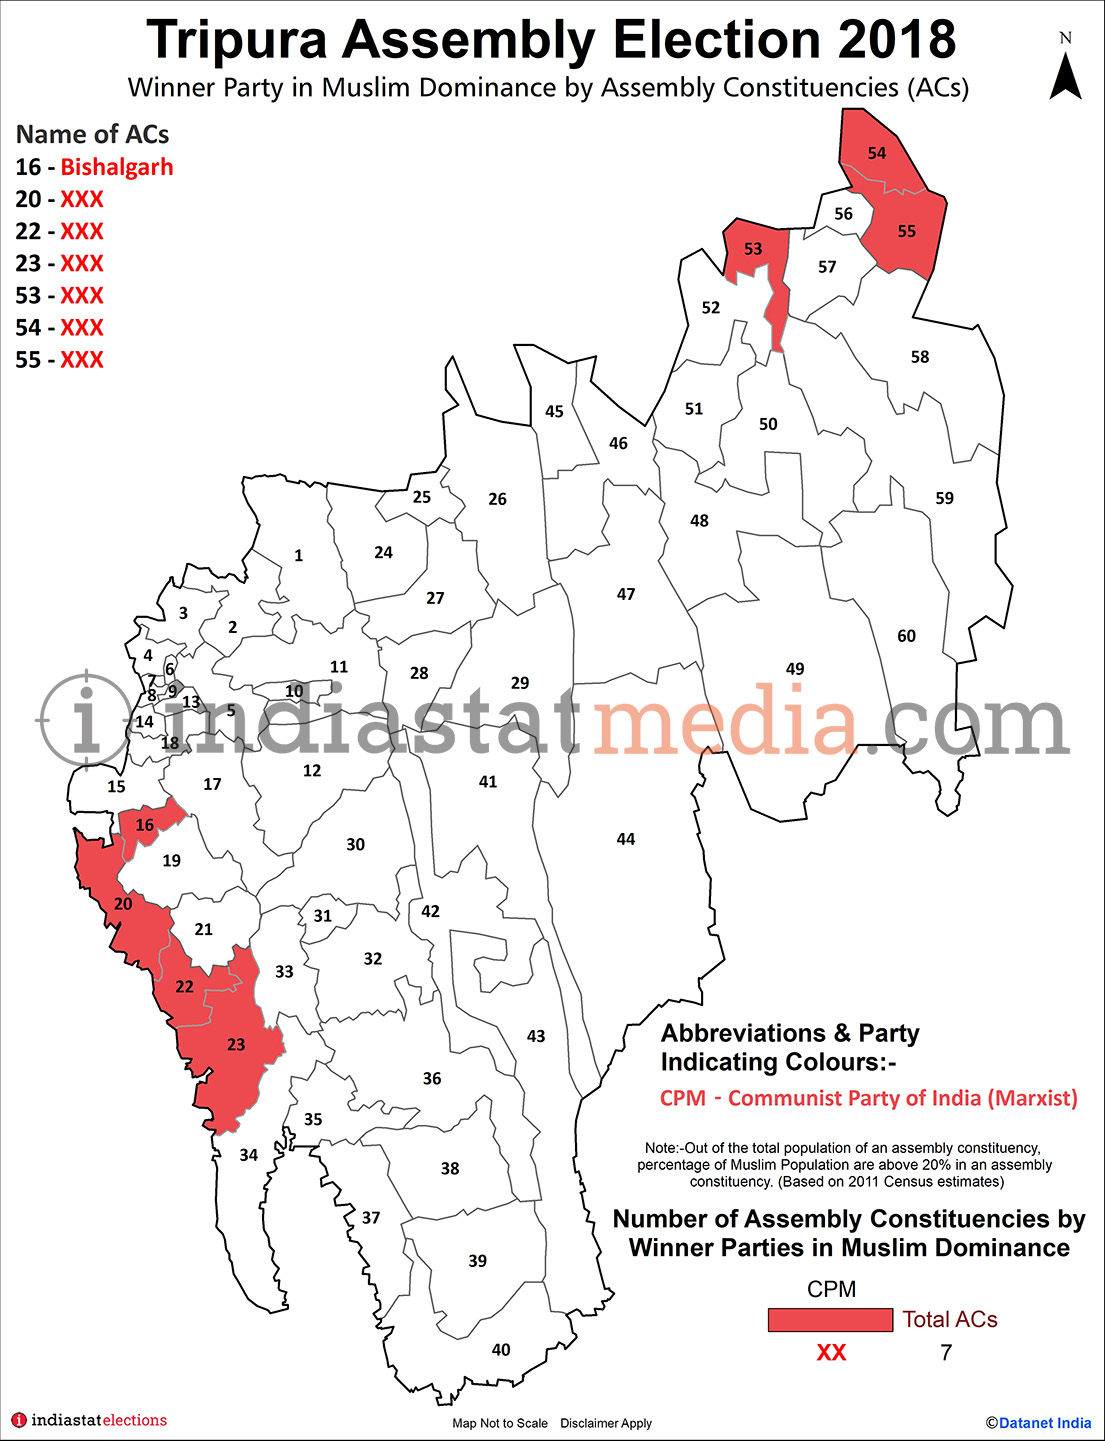 Winner Parties in Muslim Dominance by Constituencies in Tripura (Assembly Election - 2018)